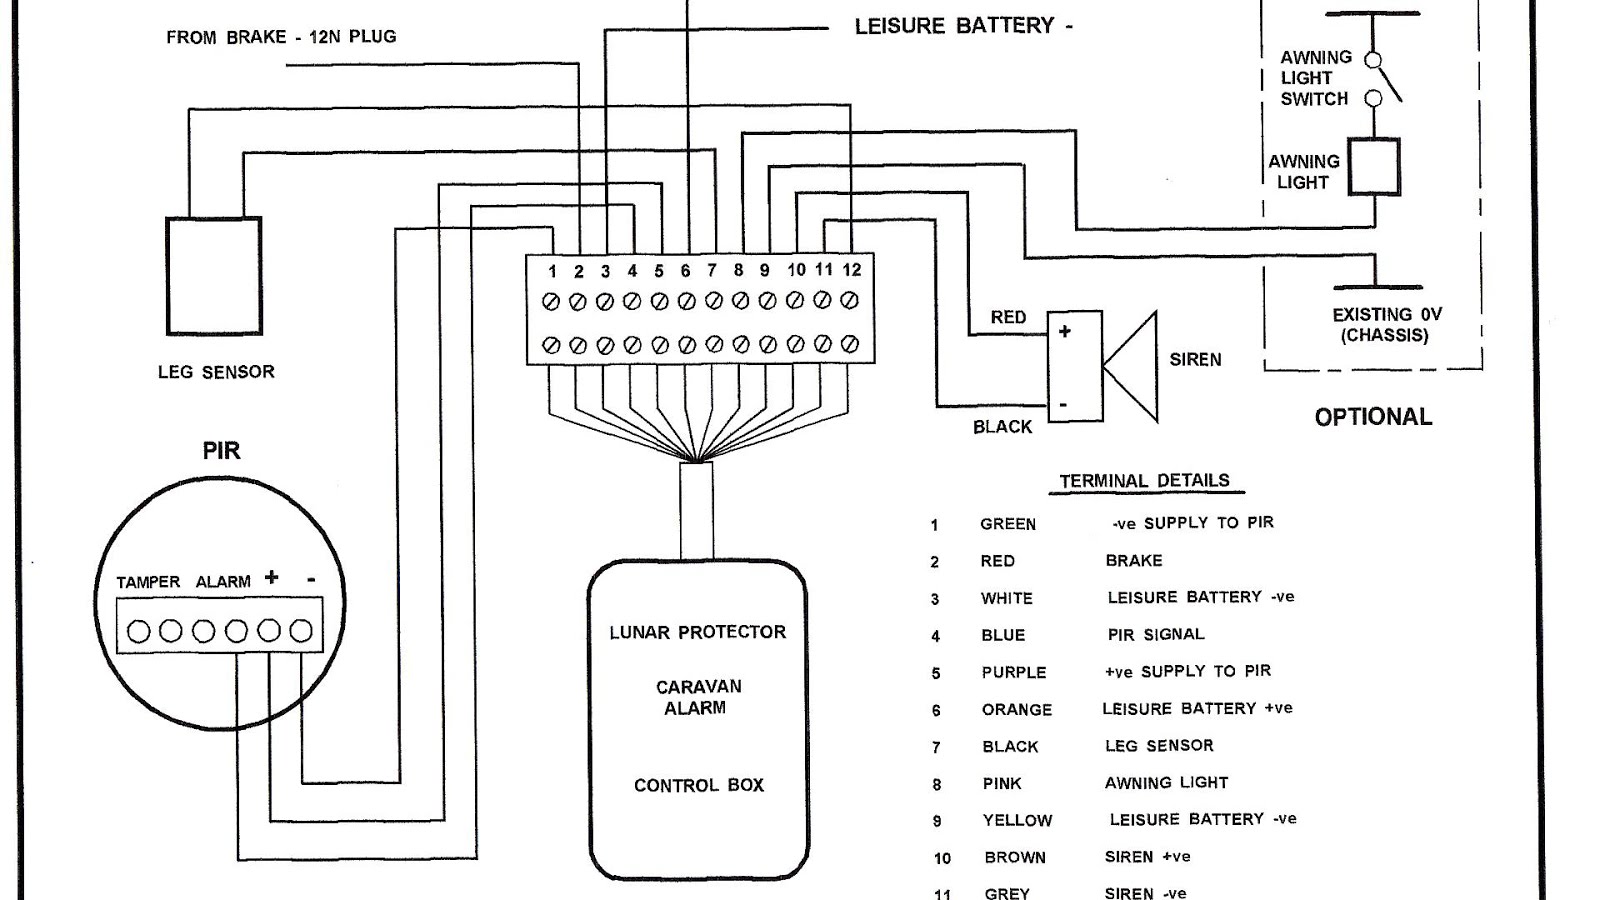 Fire Alarm System Wiring Diagram - Fire Choices